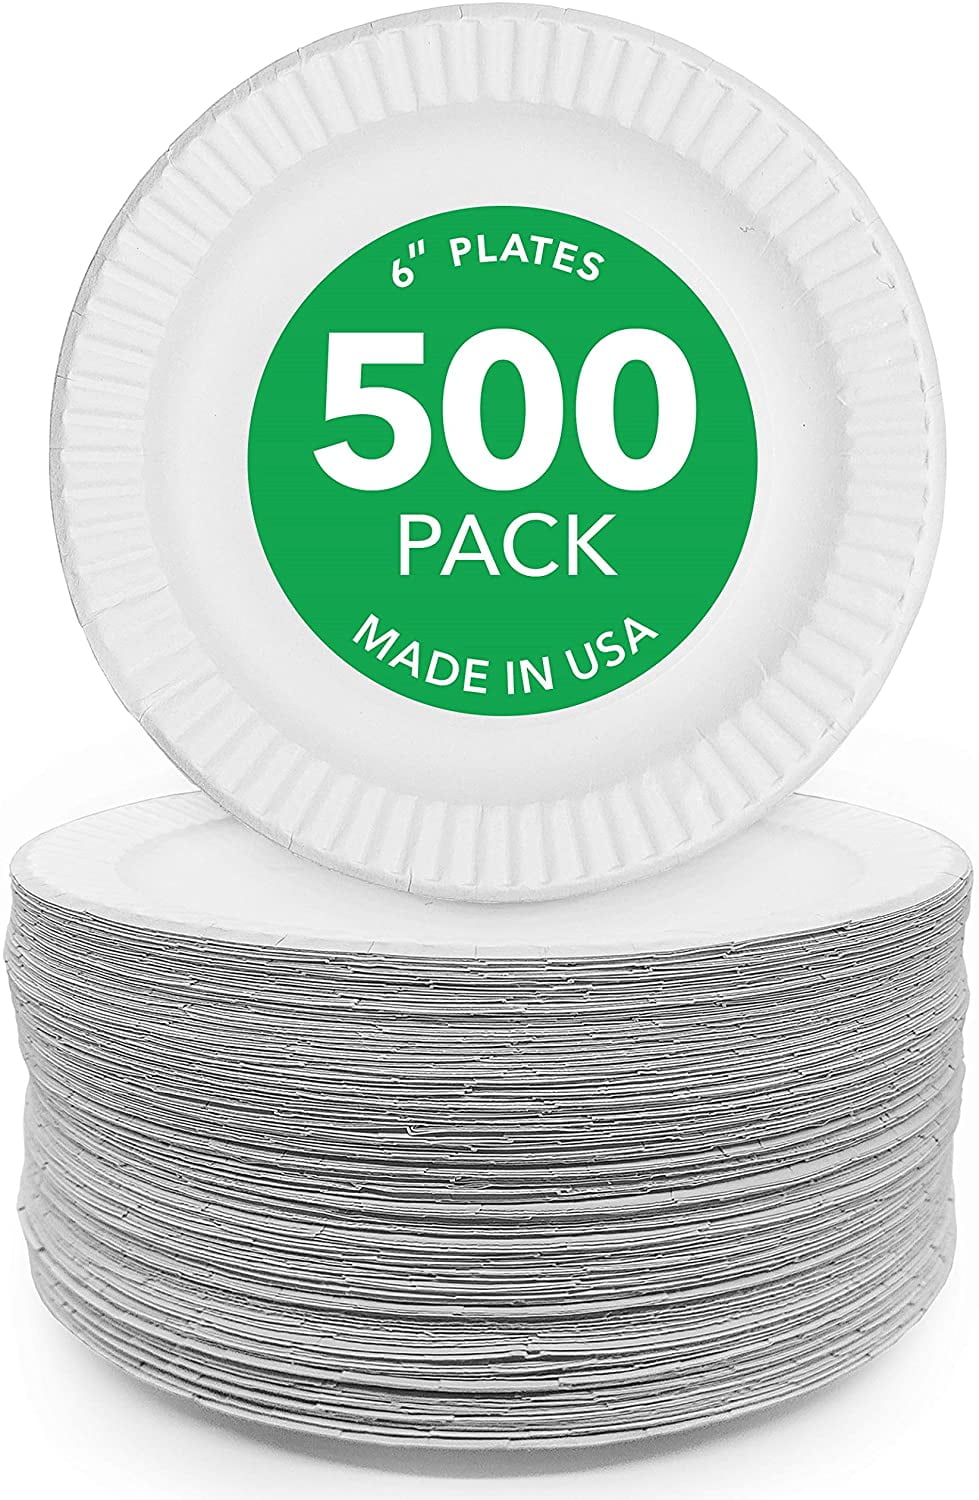 Bulk paper plates • Compare & find best prices today »